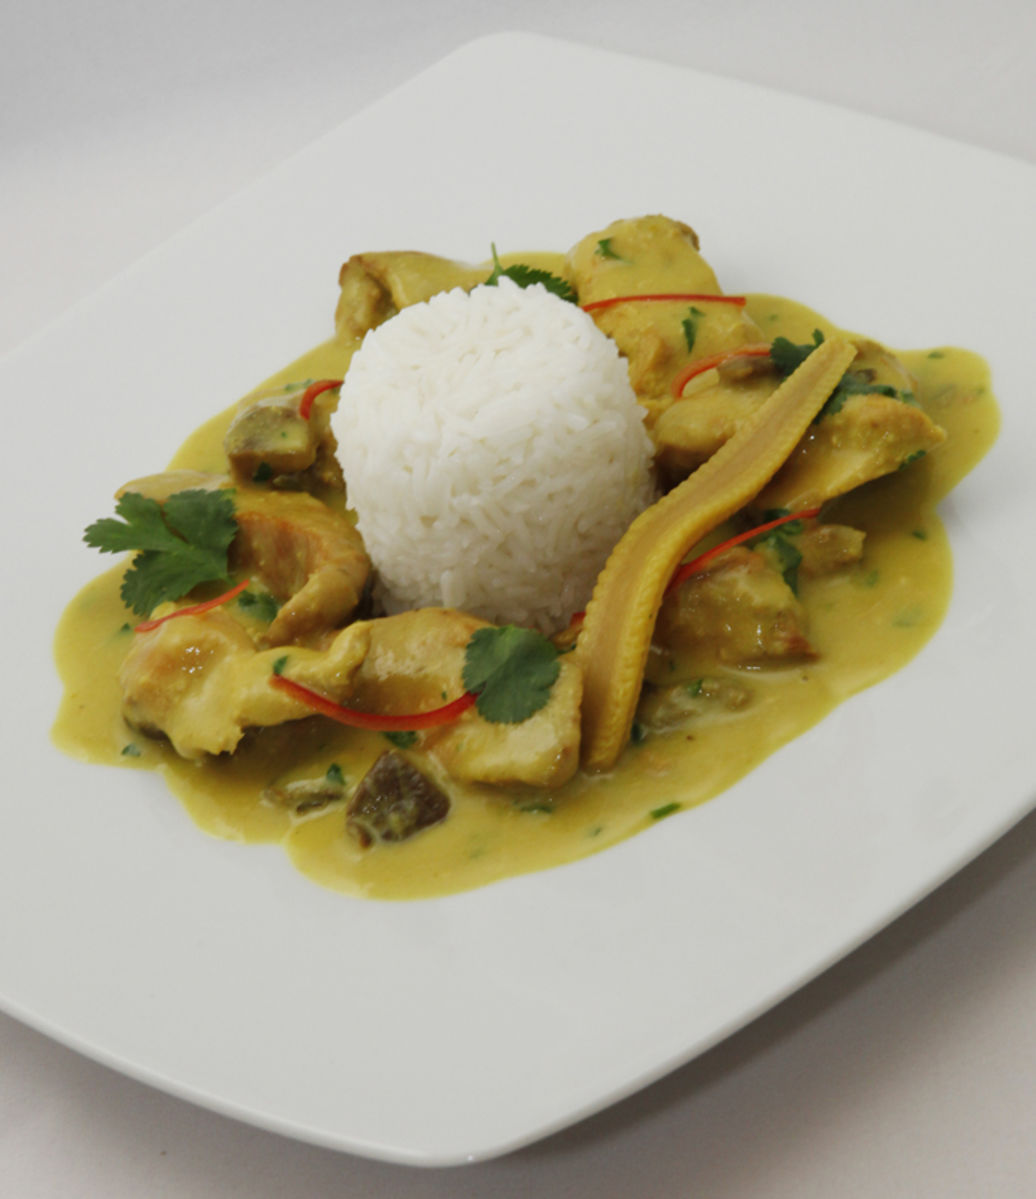 Green curry of chicken fillet with coconut milk